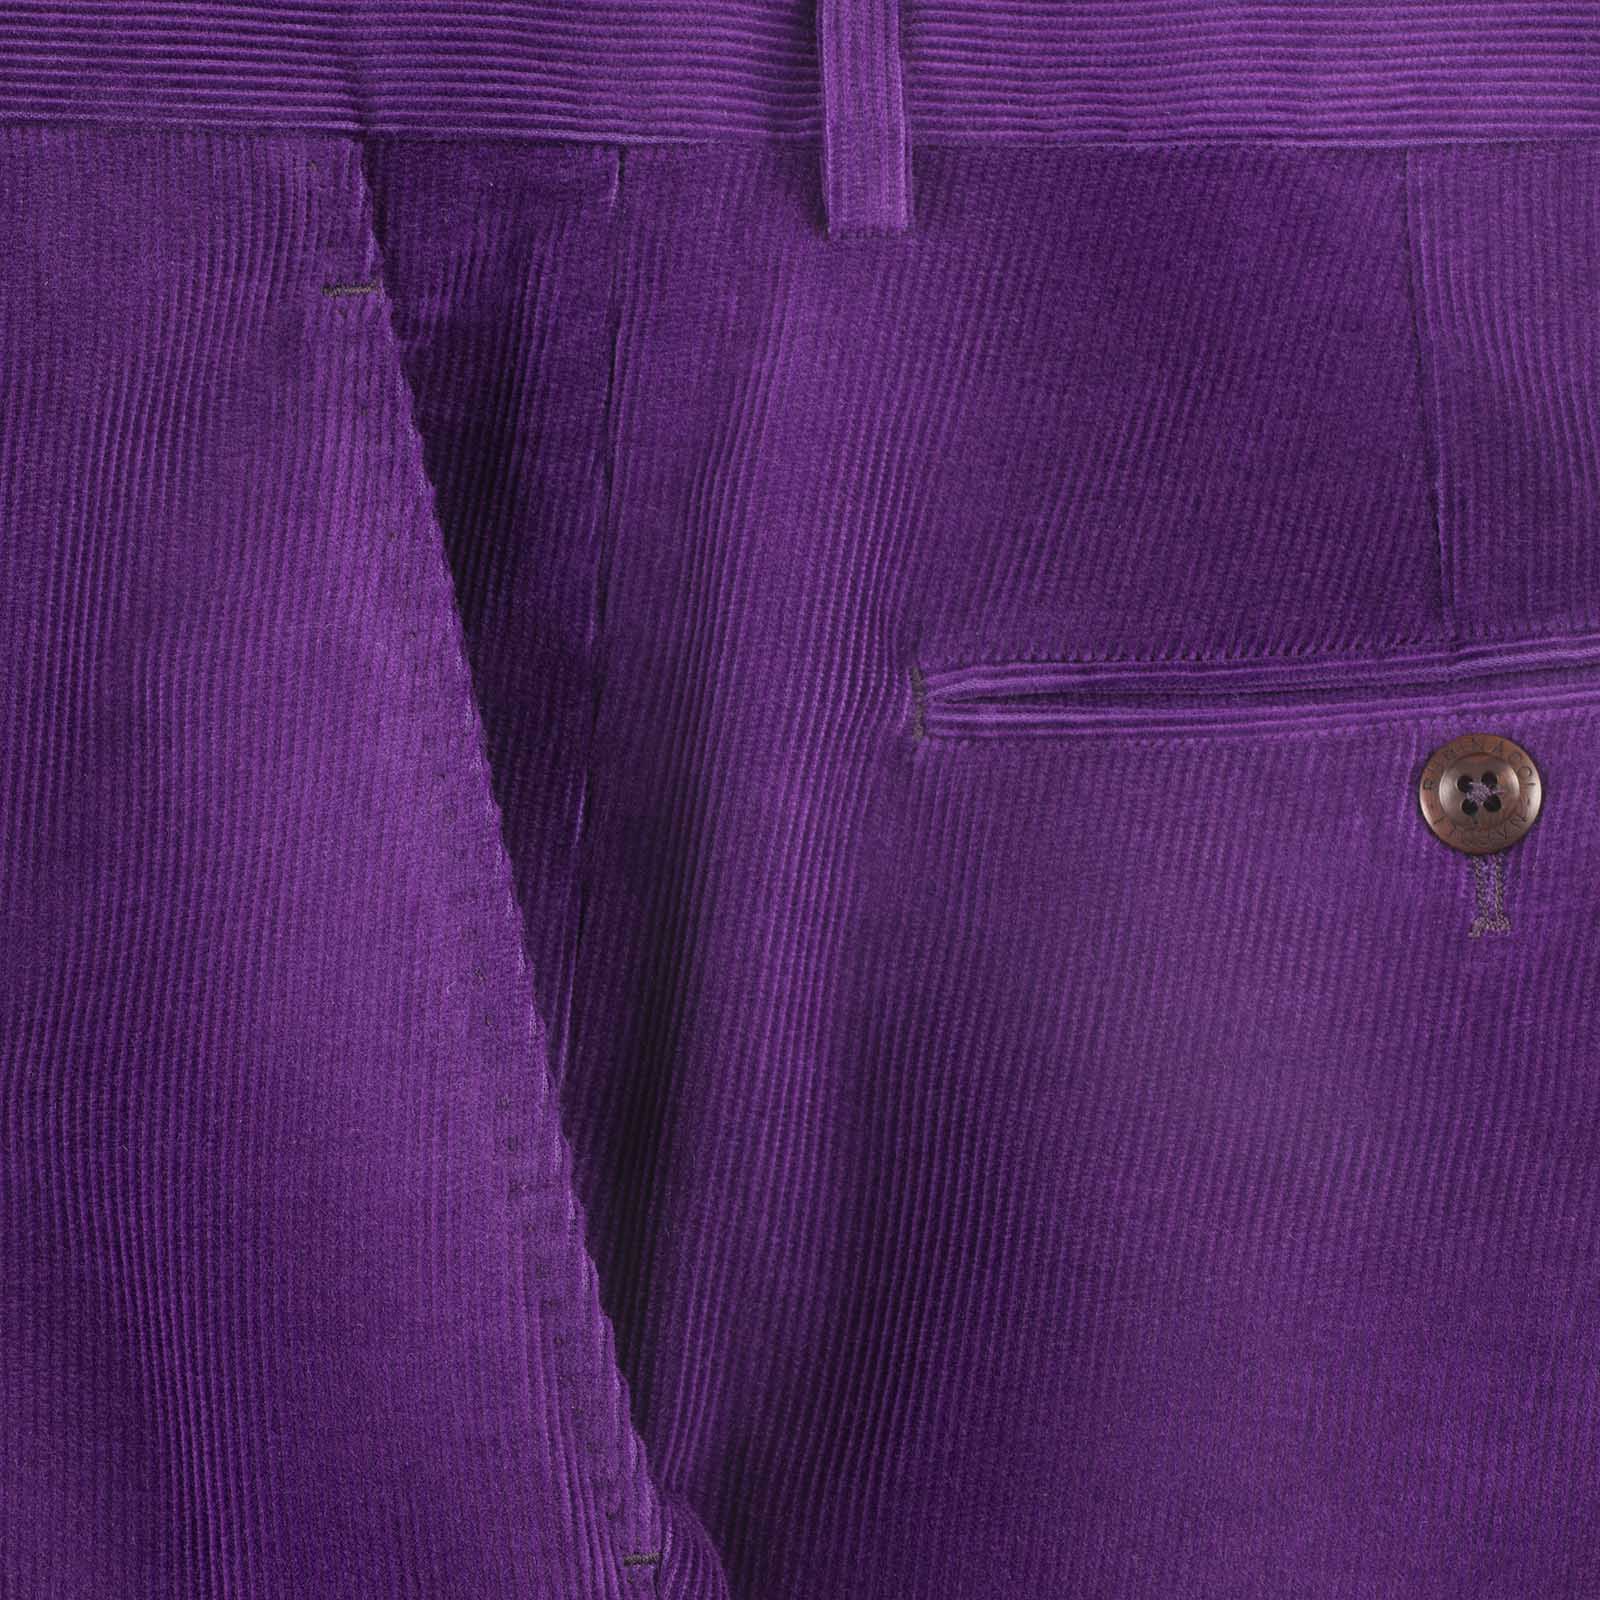 Twinset - Purple corduroy flared pants with metallic logo 232TT2364 - buy  with Czech Republic delivery at Symbol